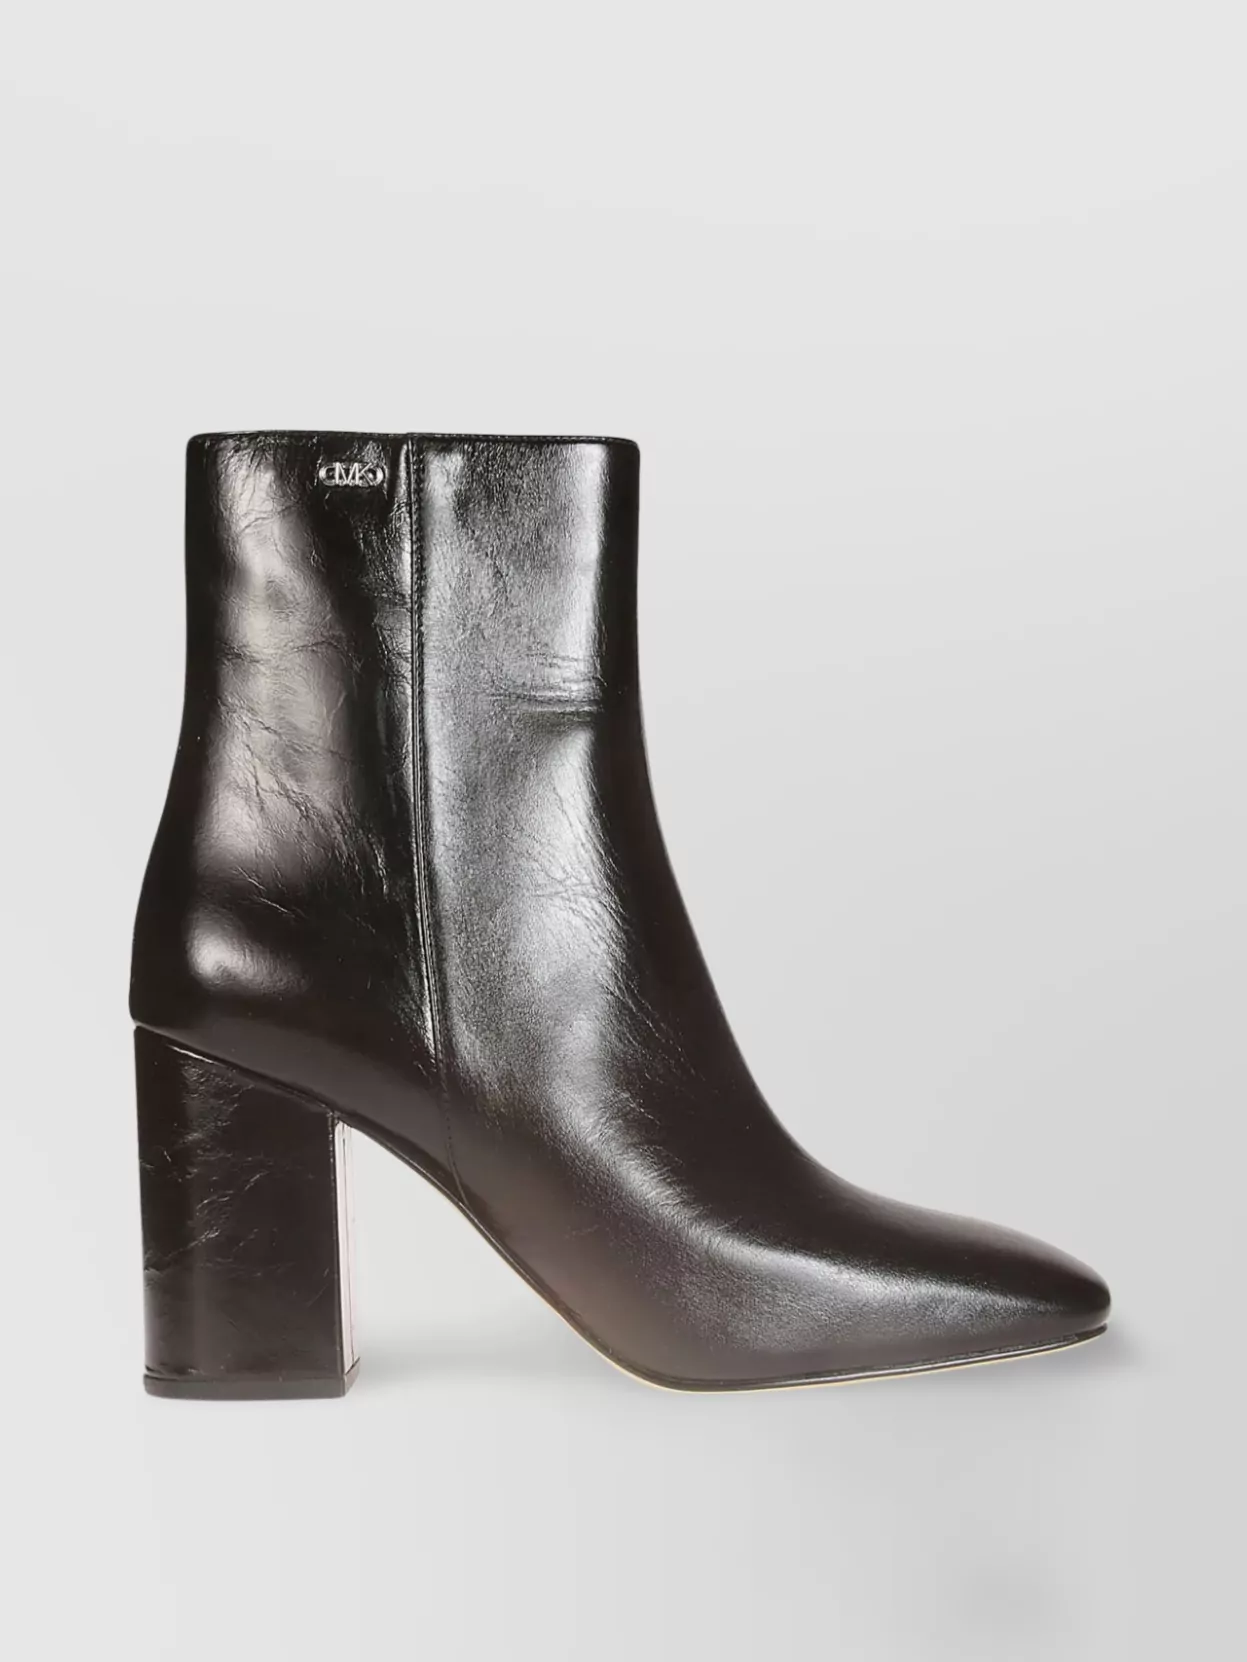 Shop Michael Kors Pointed Toe Leather Boots With A Smooth Finish